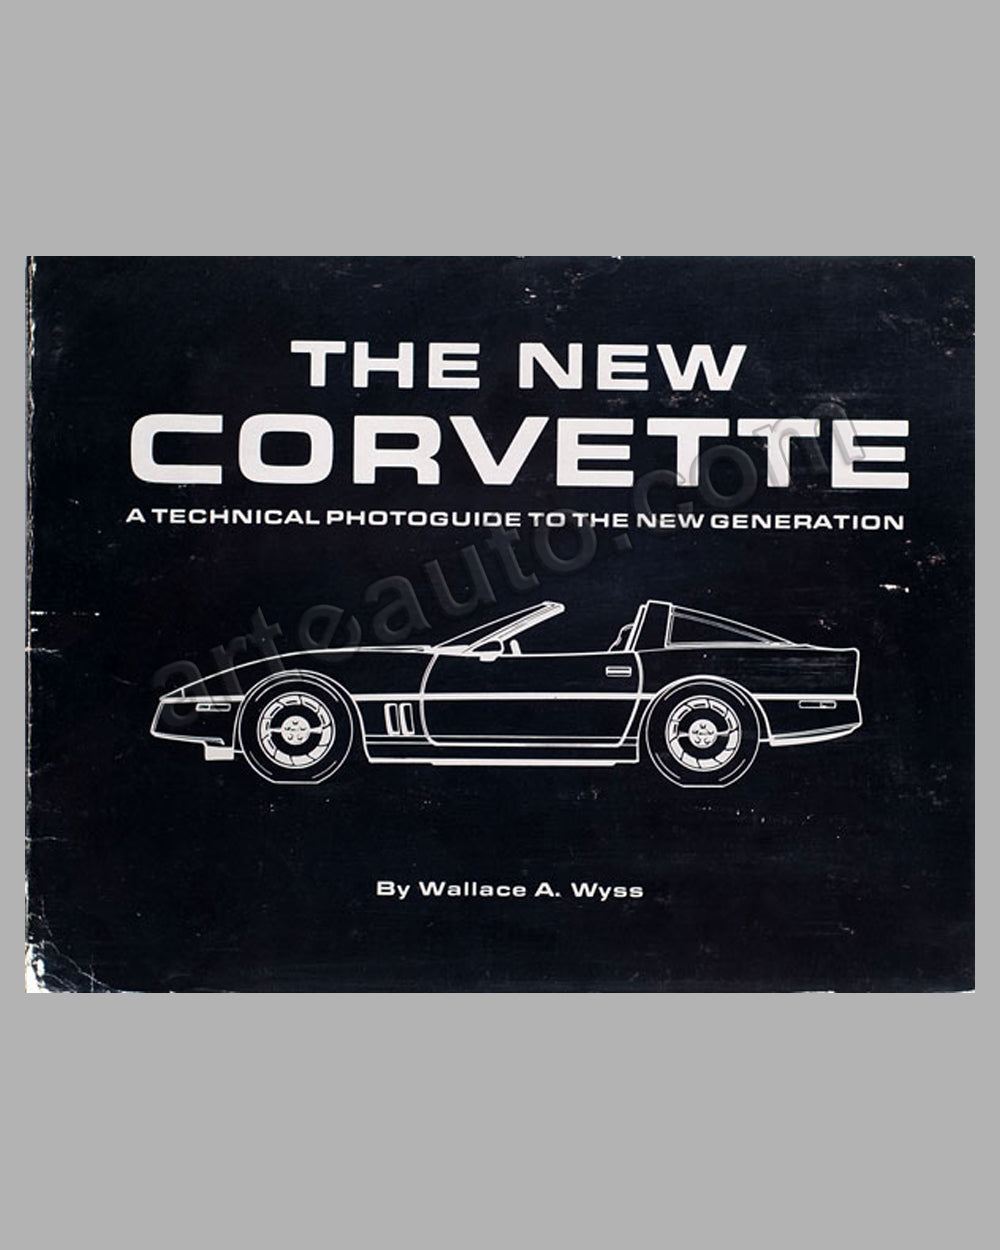 The New Corvette book by W. Wyss